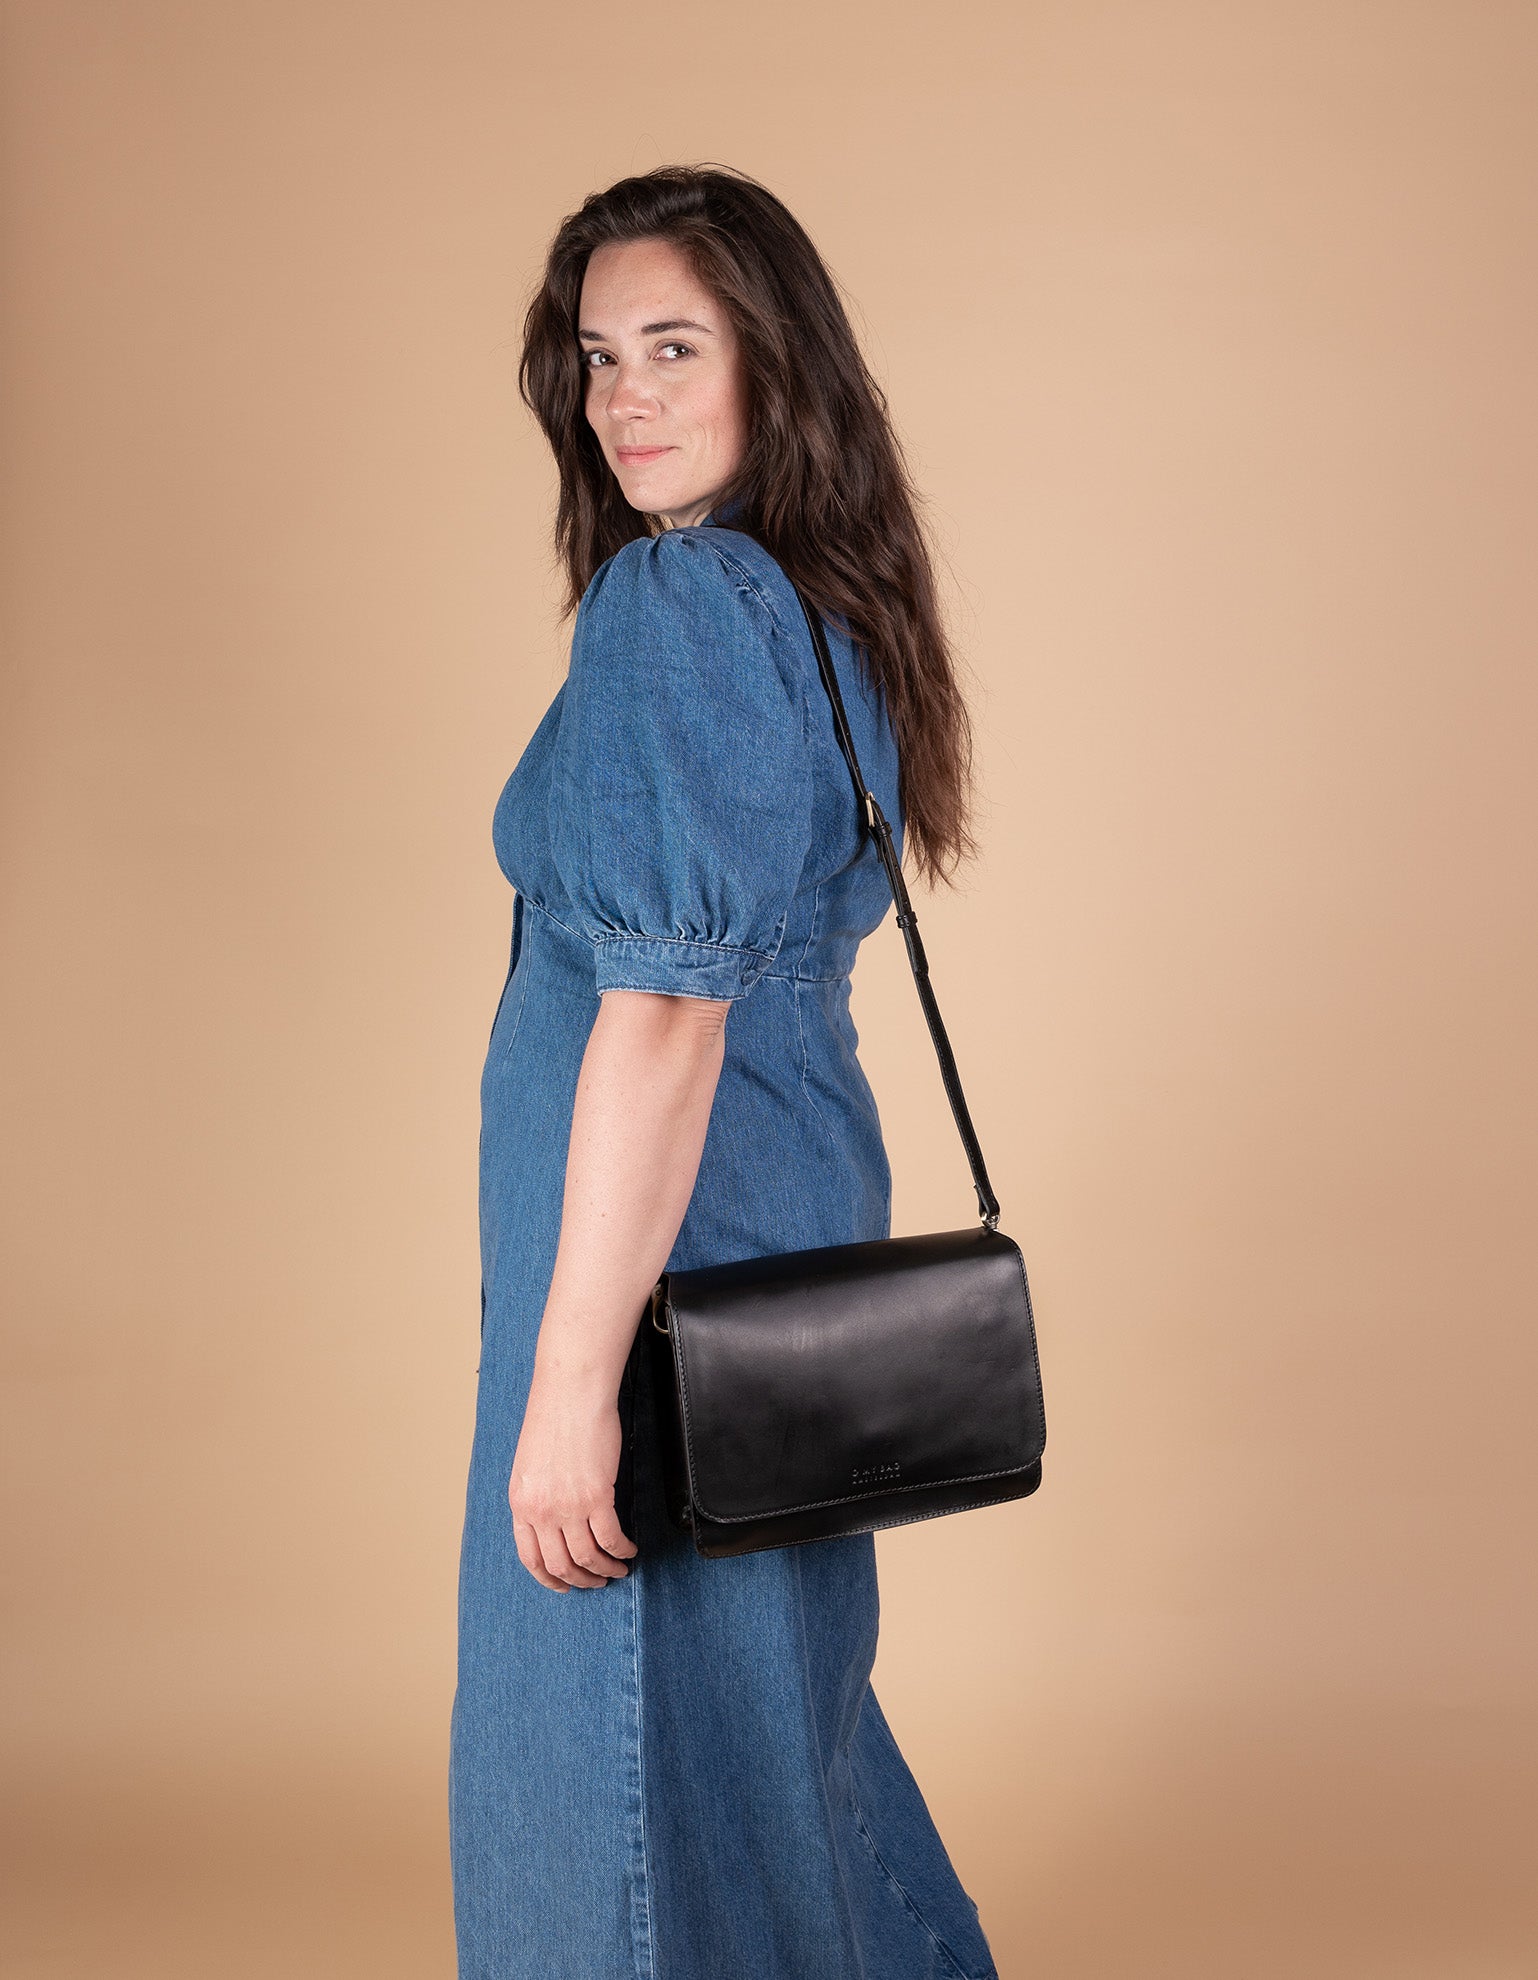 Black Leather womens handbag. Square shape with an adjustable strap. Model product image